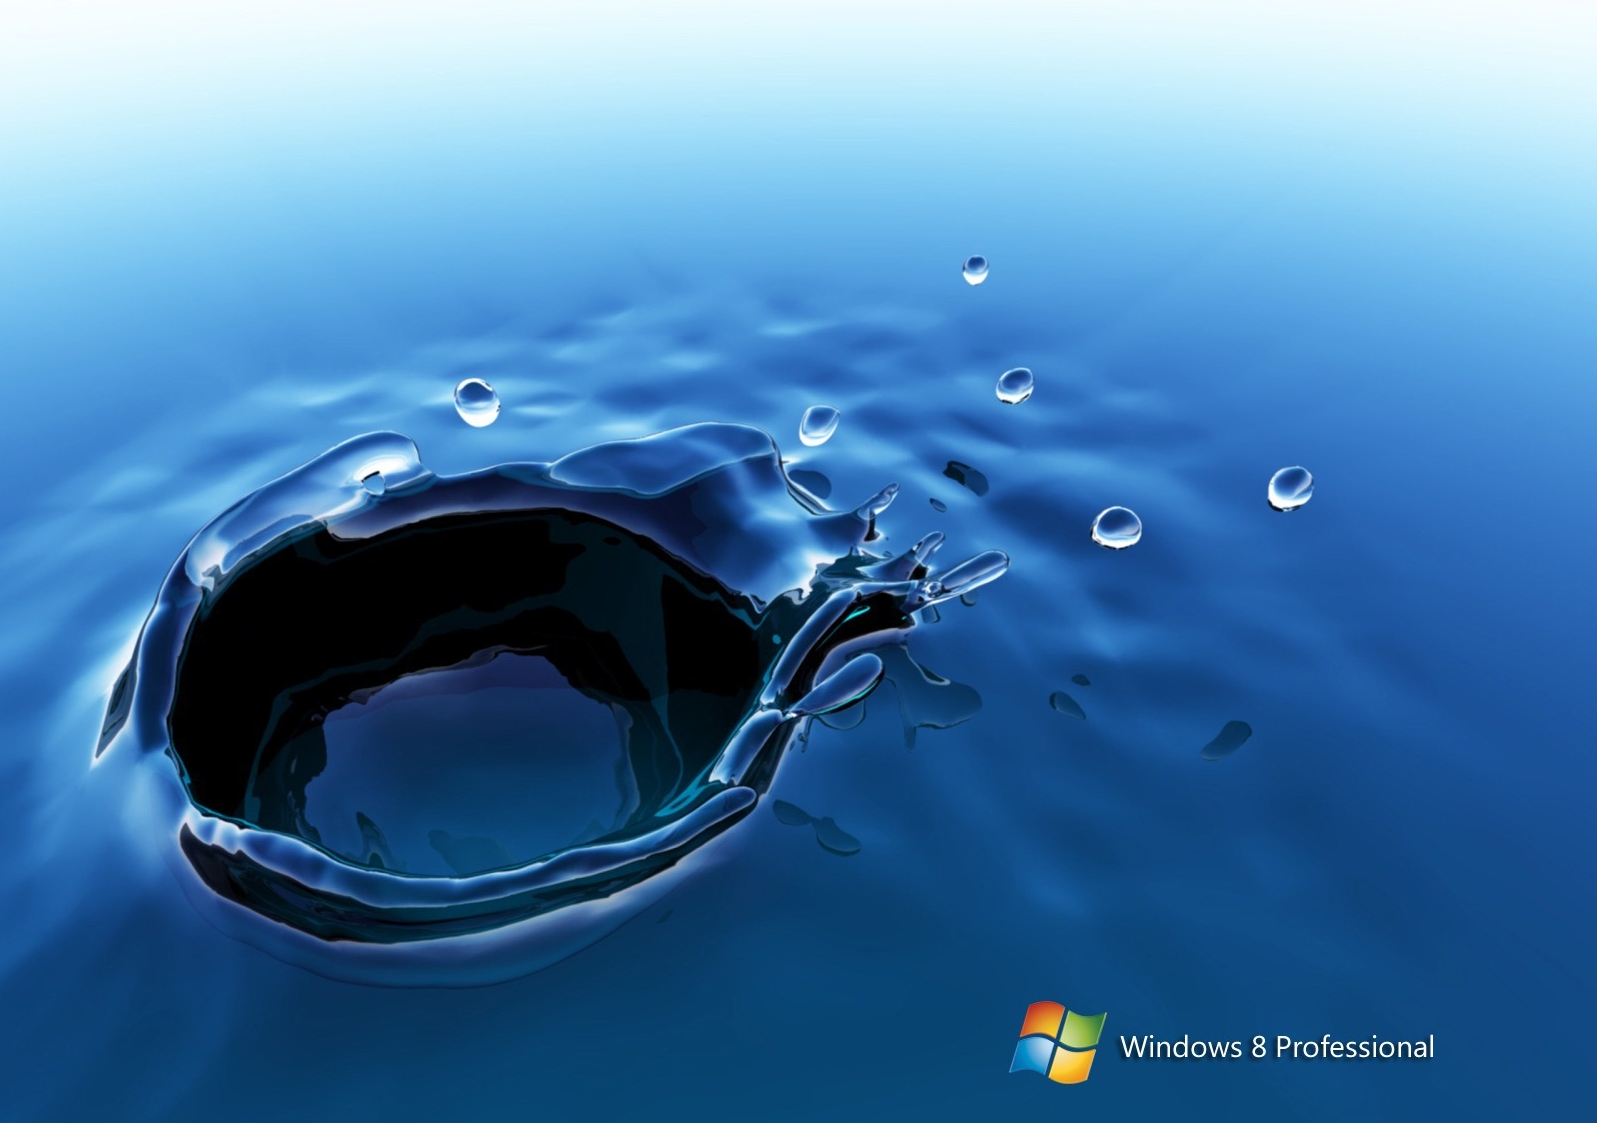 Wallpaper Themes For Windows 8 - windows 8 by thethemer ...